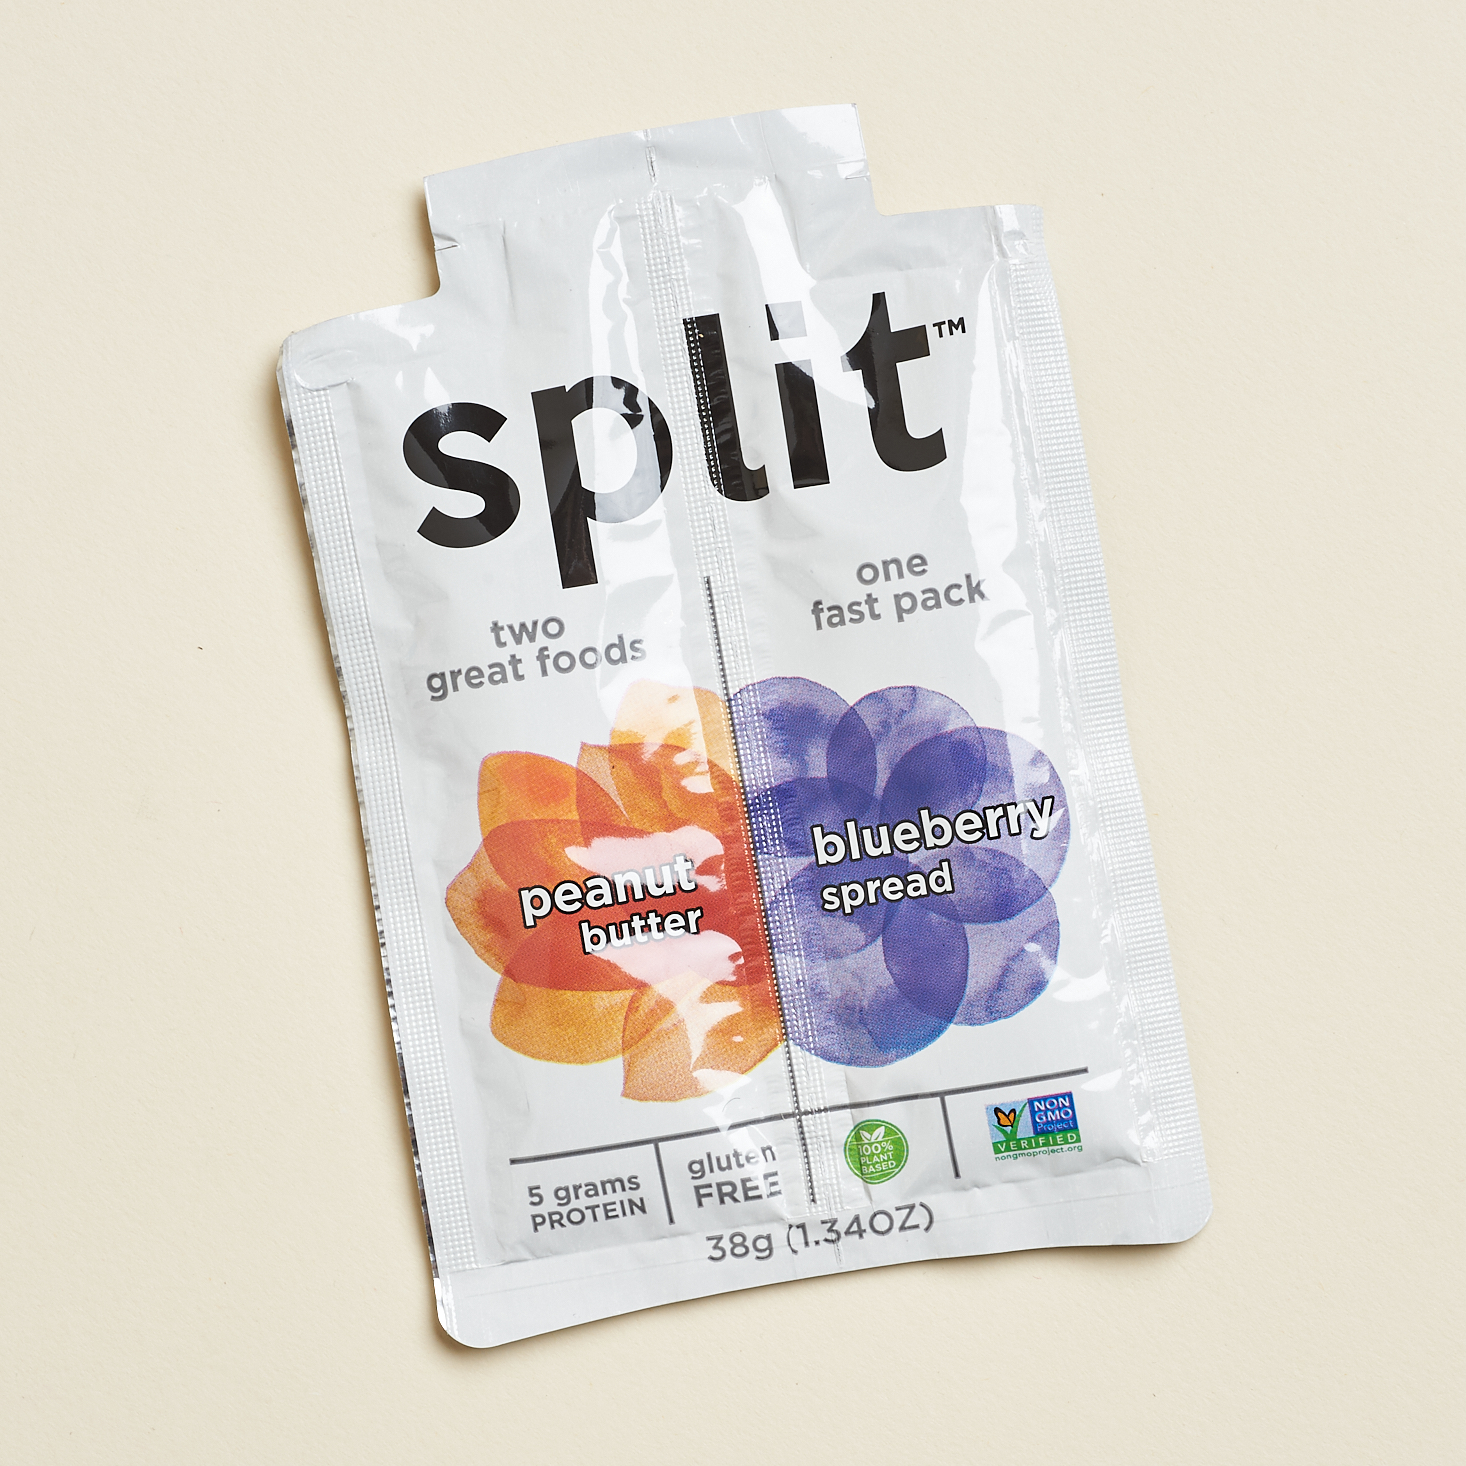 Peanut Butter and Blueberry Spread Split pack